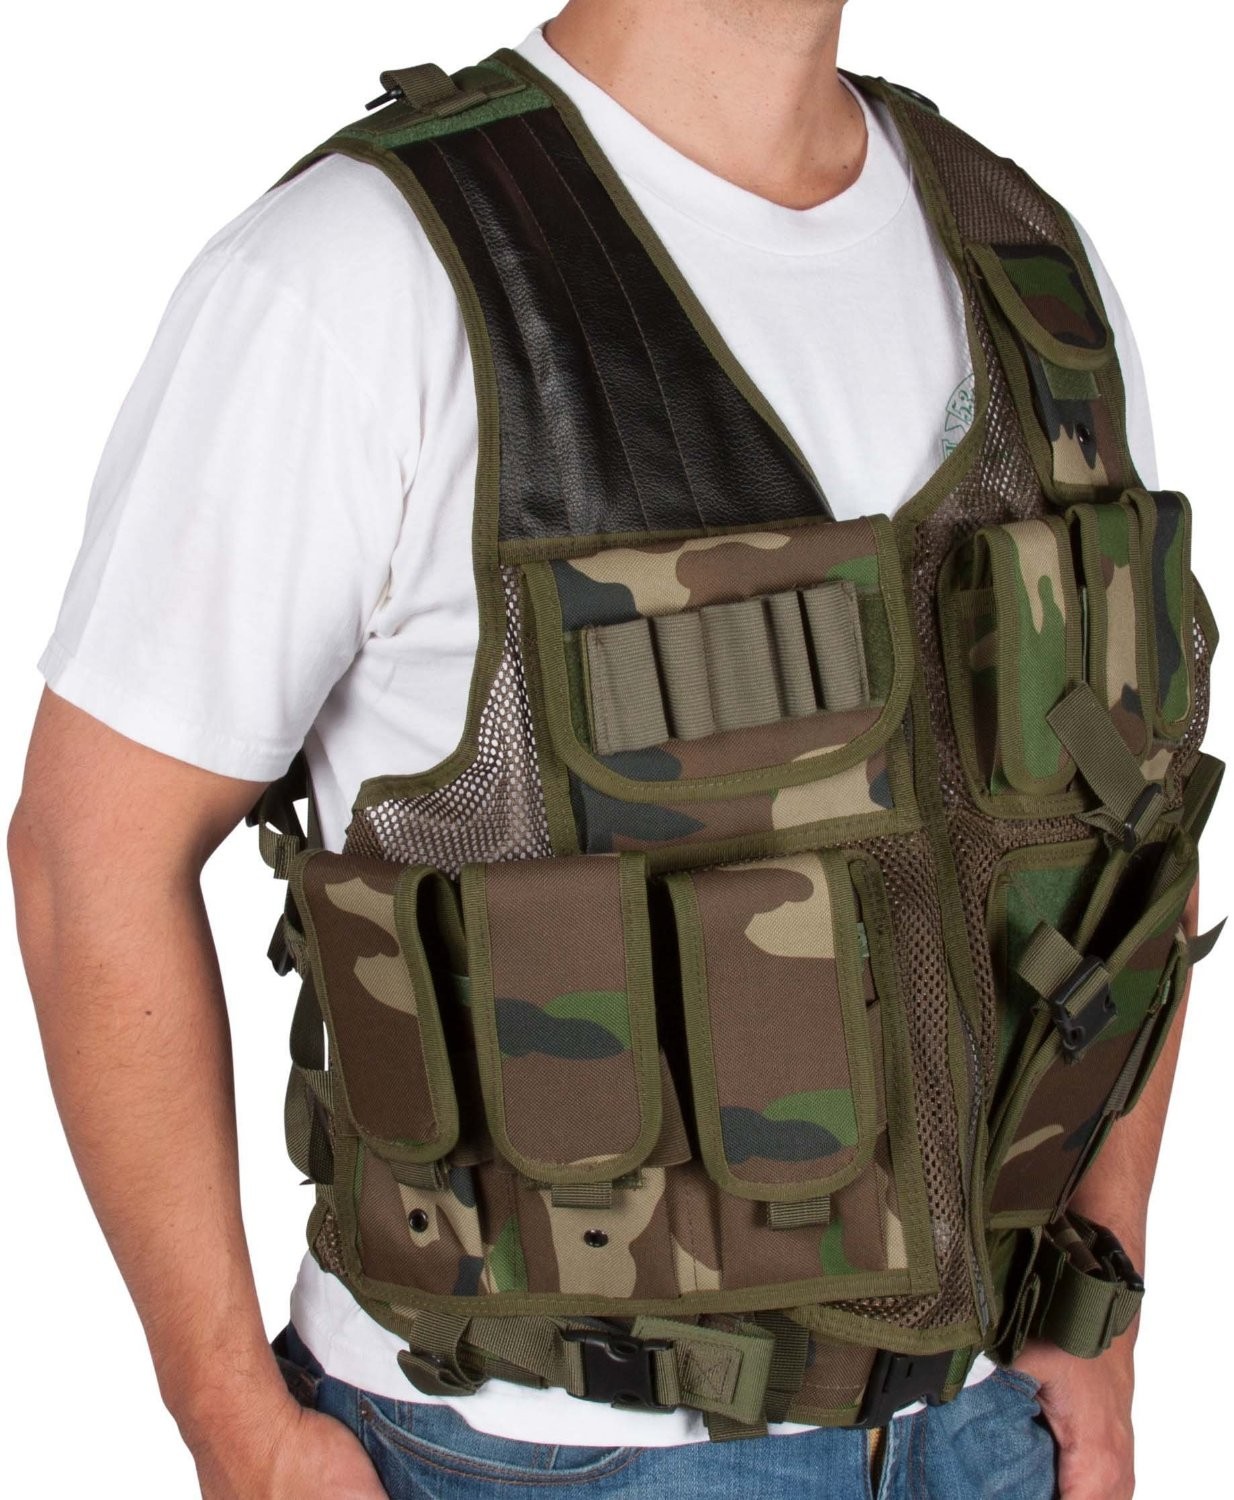 Modern Warrior Tactical Vest with Holster and Pouches Camo